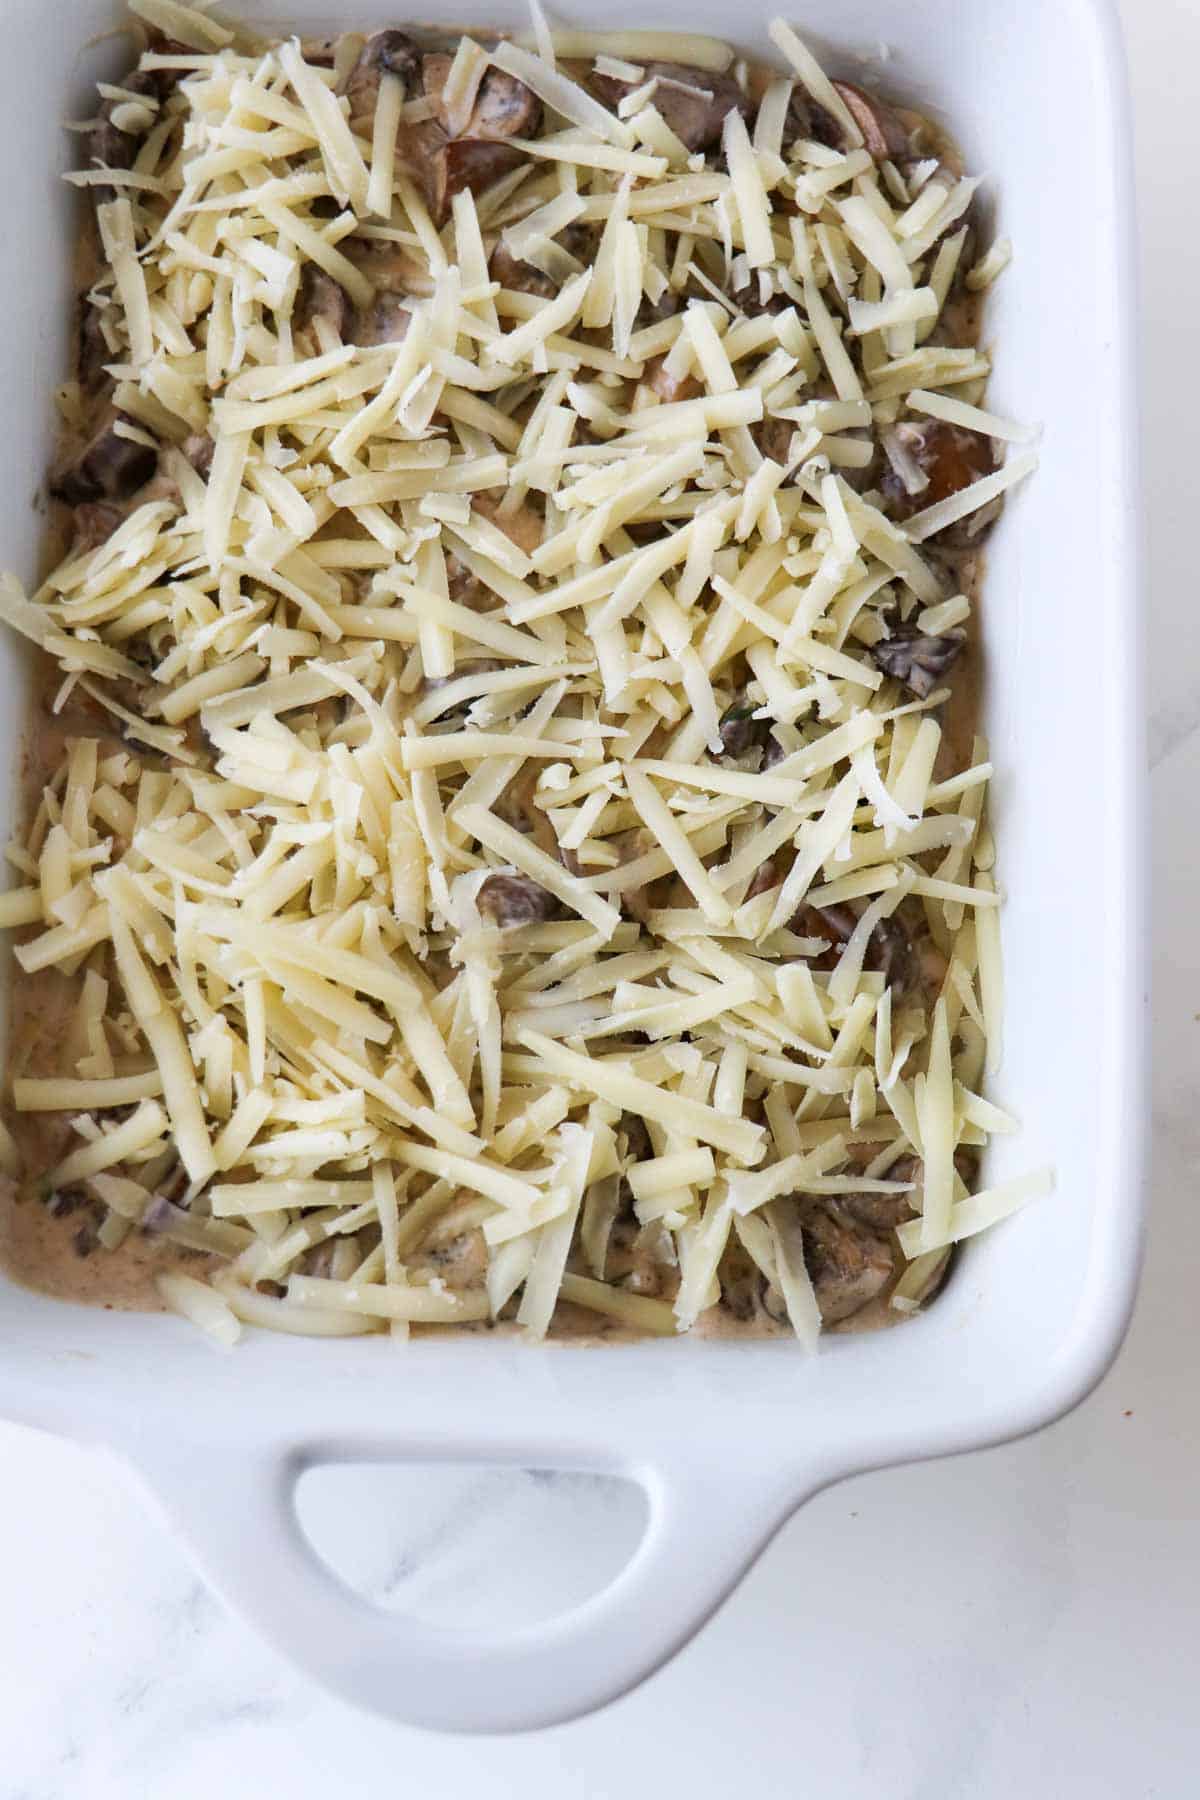 Creamy mushrooms in a baking dish topped with shredded cheese.